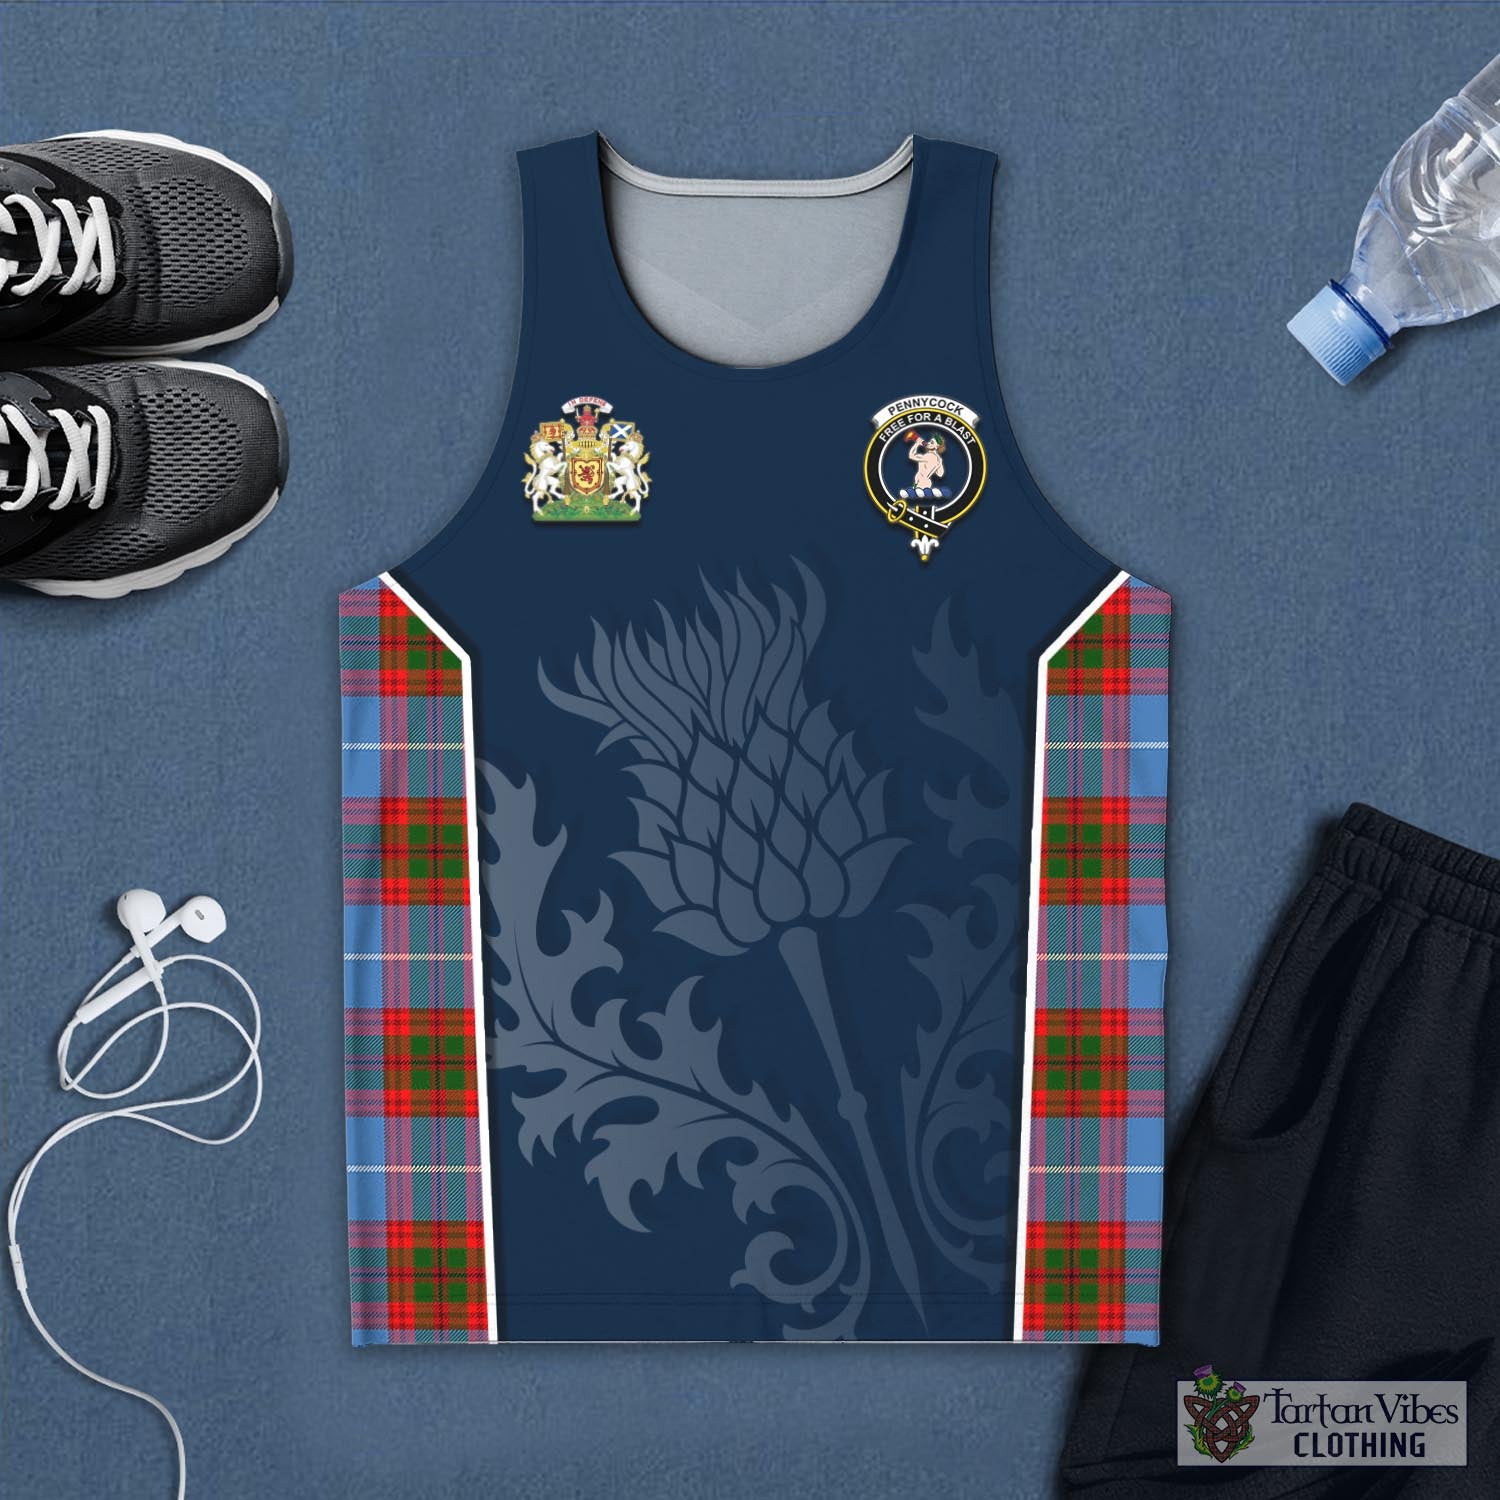 Tartan Vibes Clothing Pennycook Tartan Men's Tanks Top with Family Crest and Scottish Thistle Vibes Sport Style